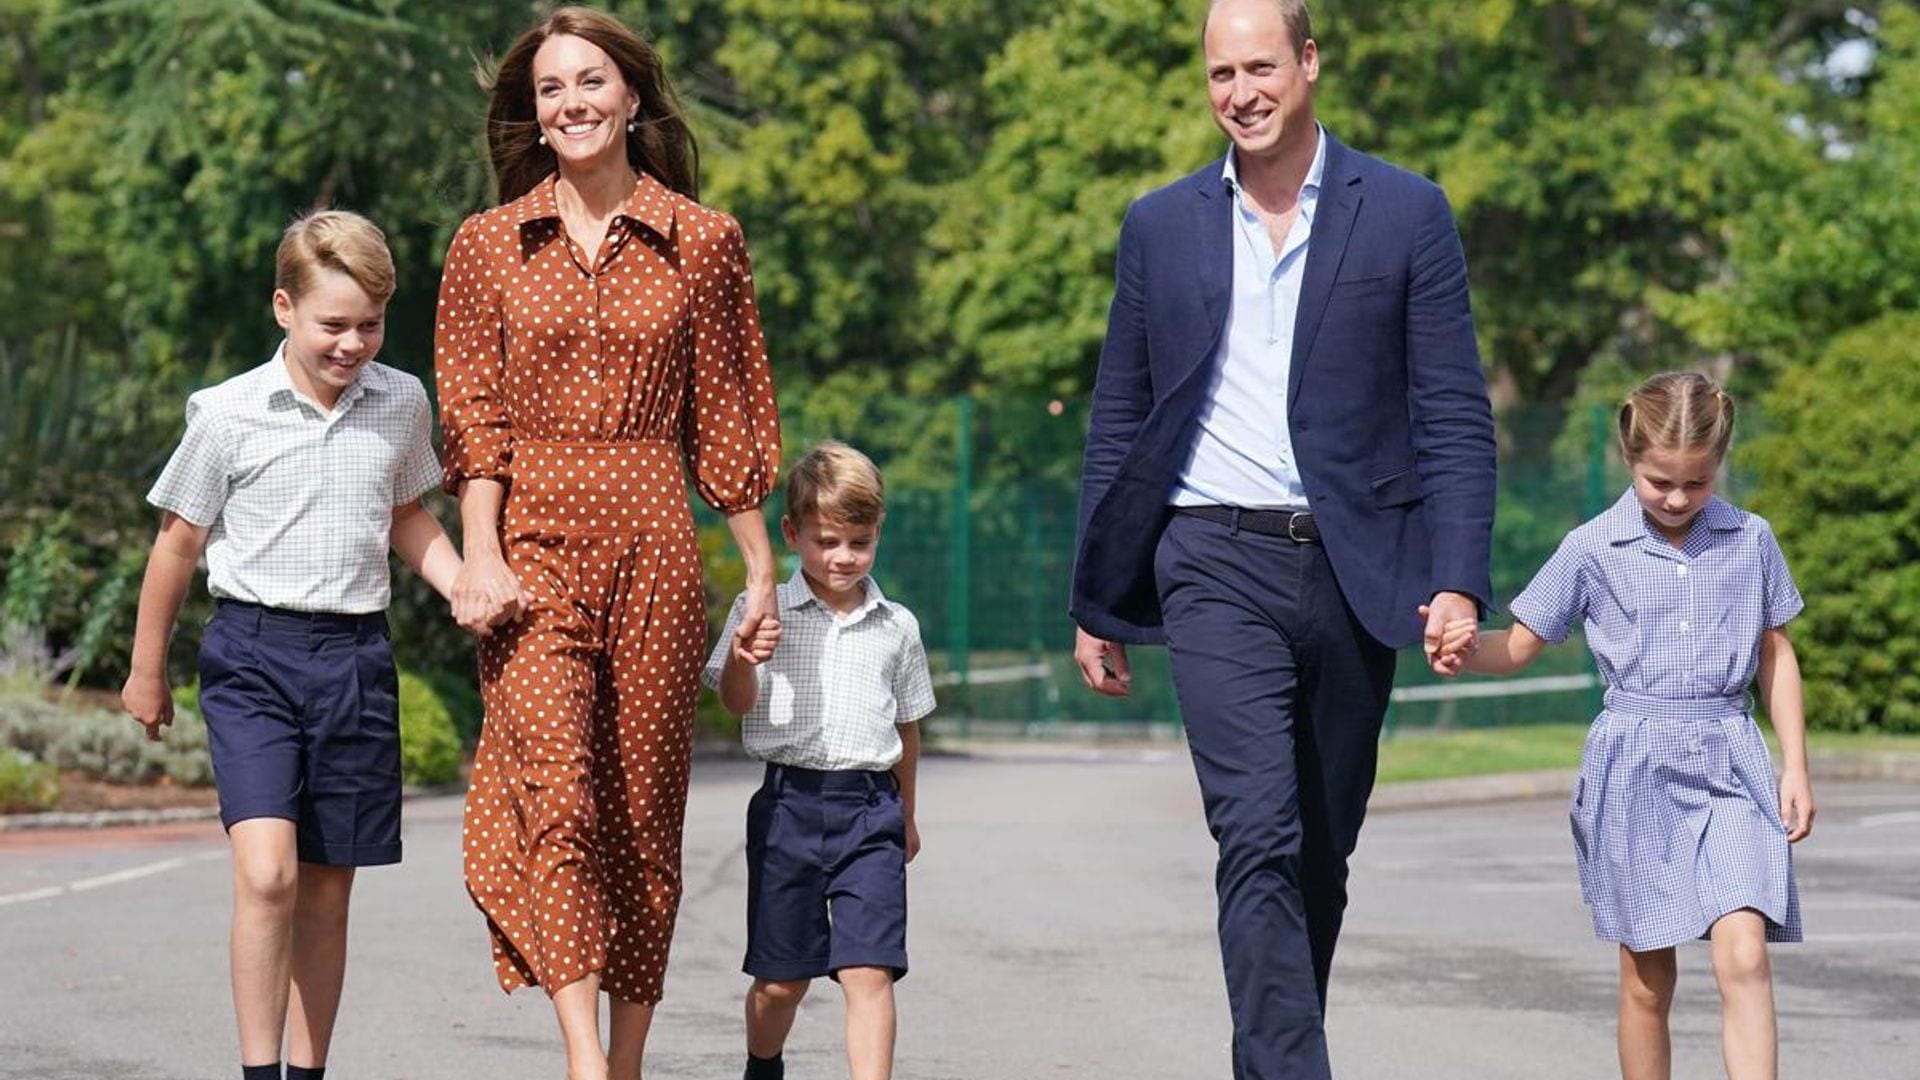 When do Prince George, Princess Charlotte and Prince Louis start school?